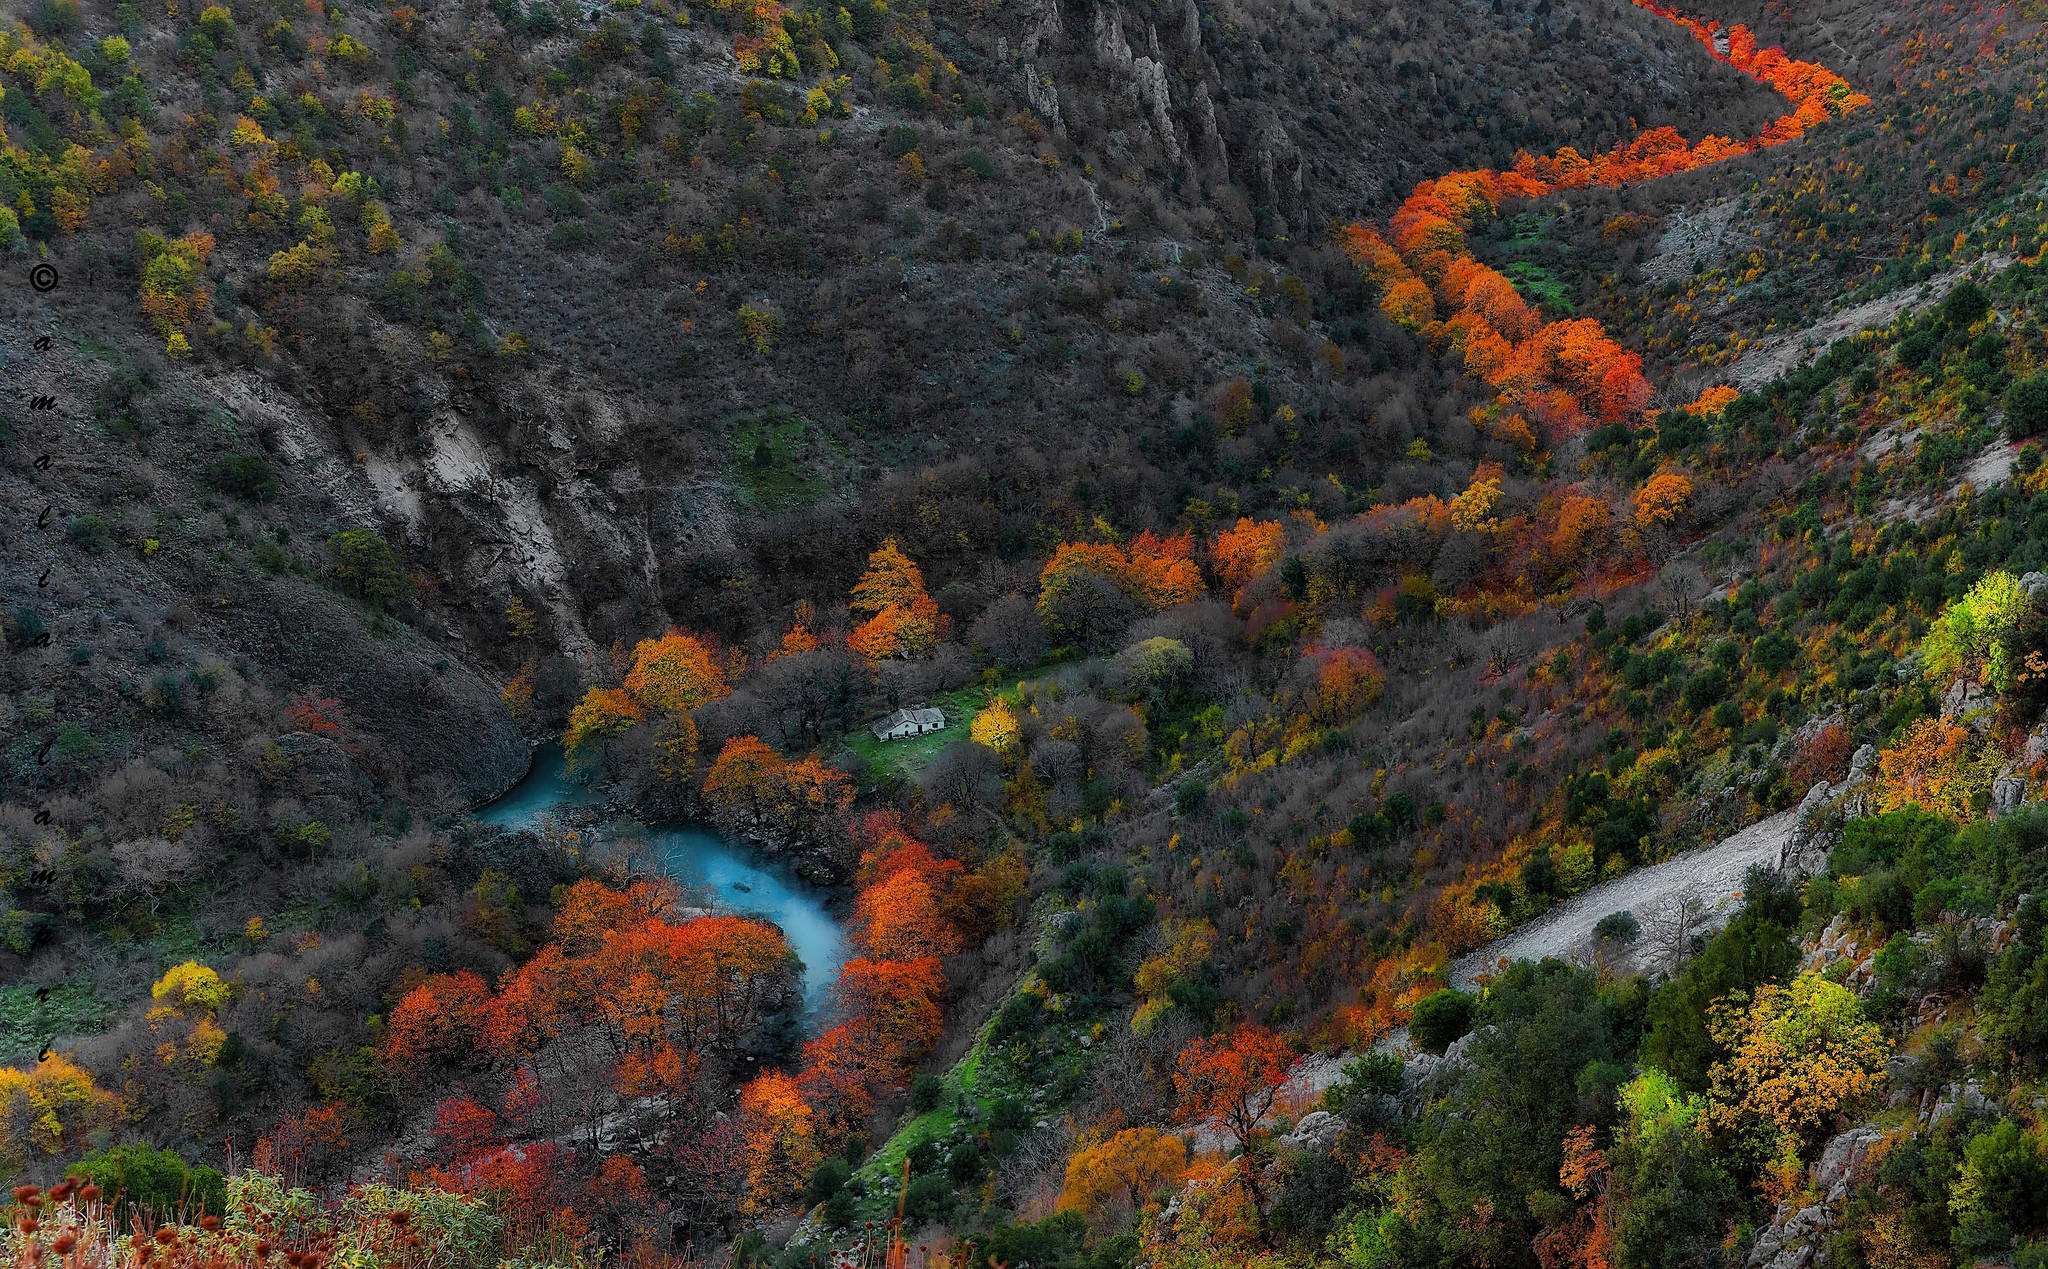 General 2048x1269 mountains river nature fall gorge trees landscape orange yellow green blue